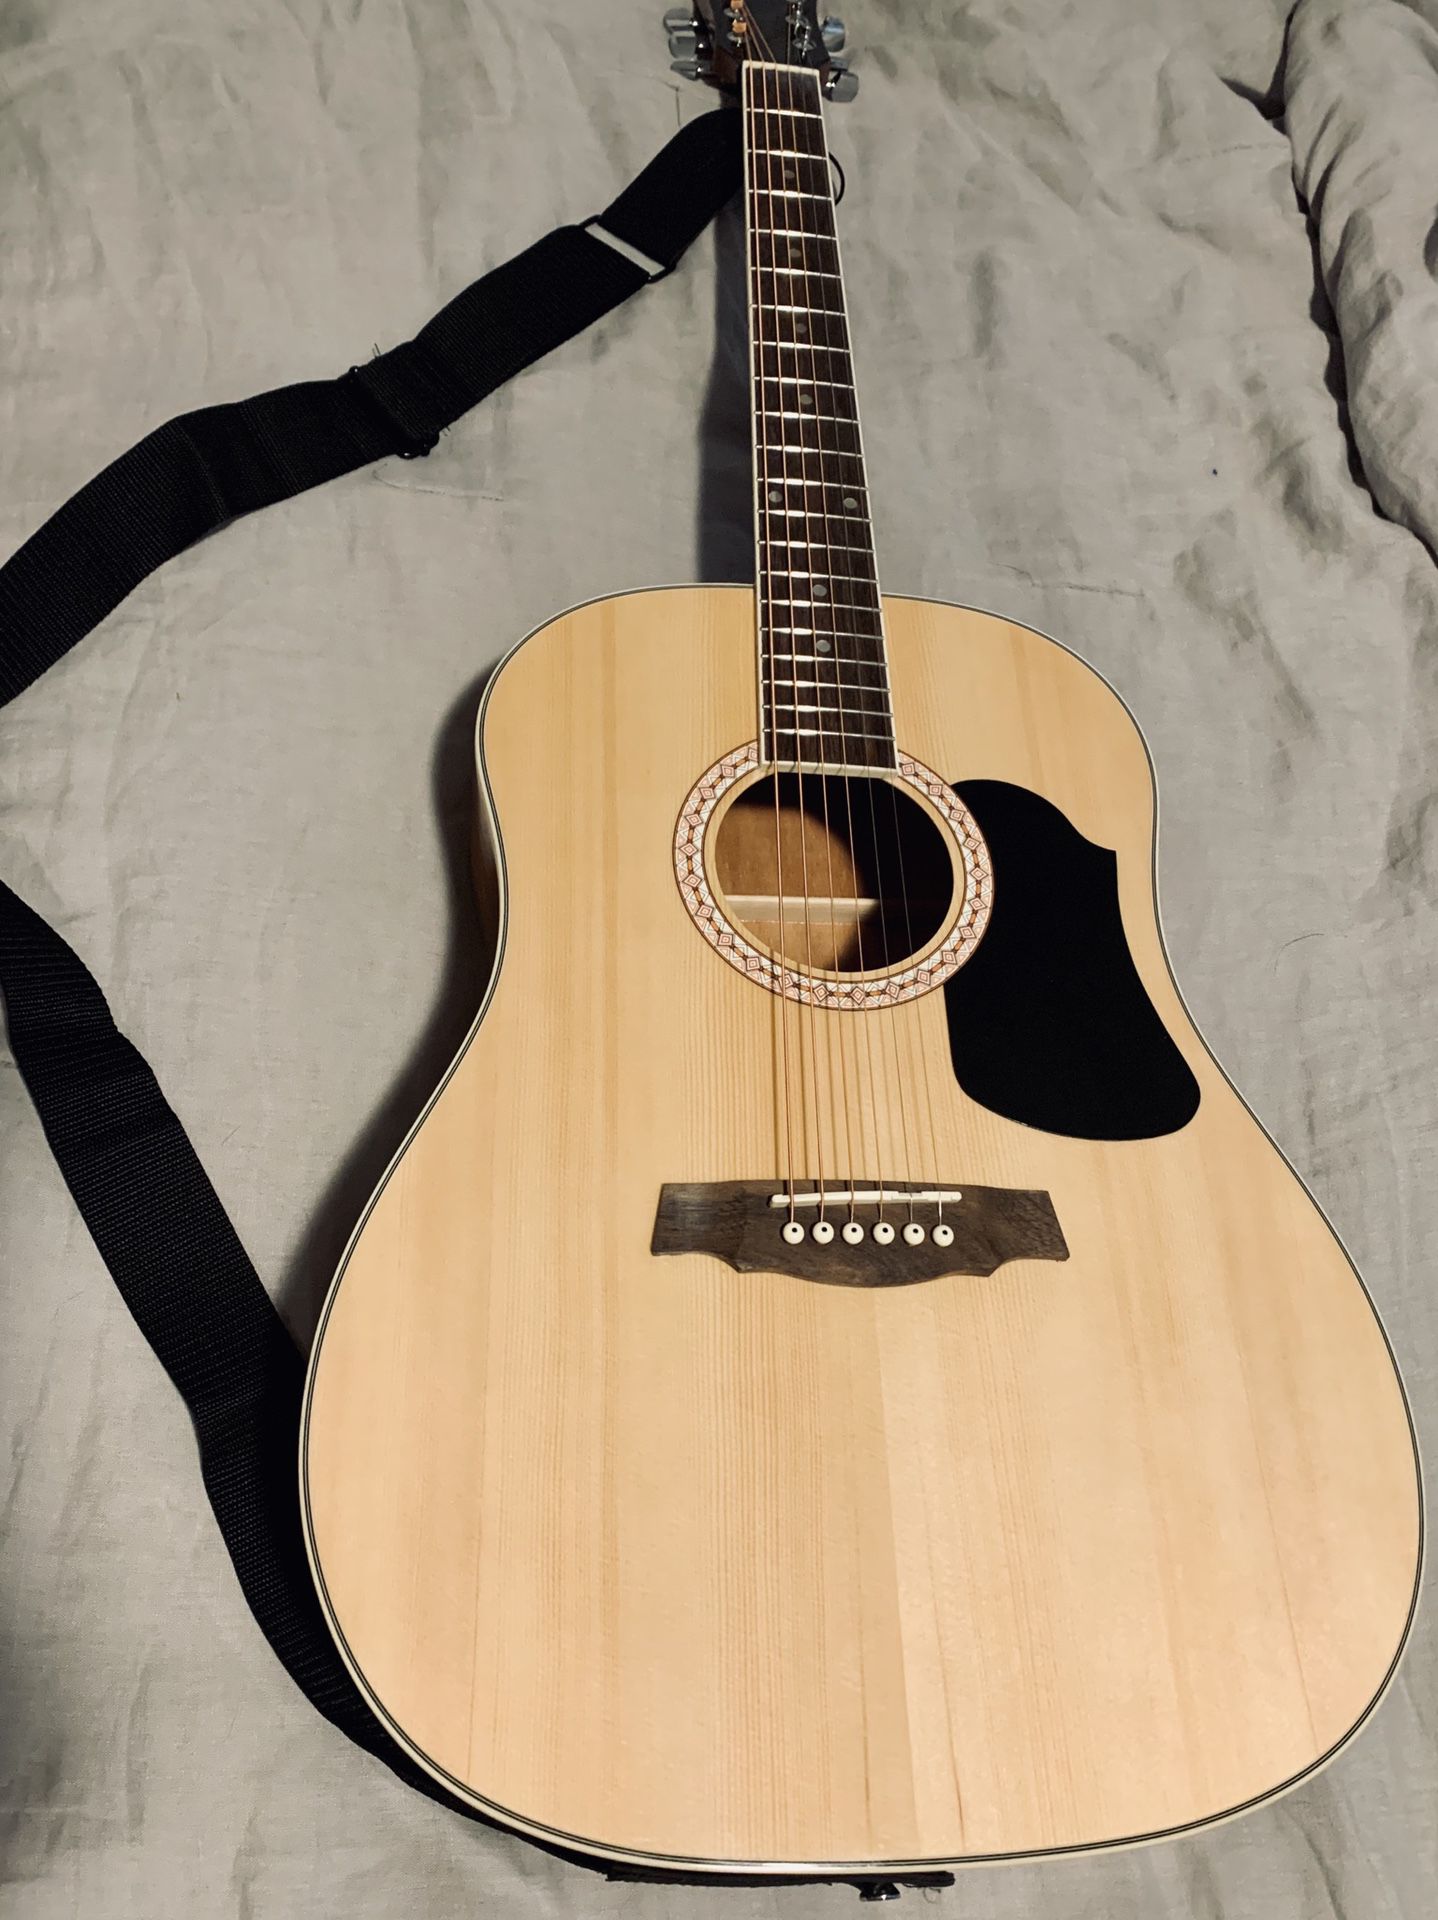 Brand new Acoustic Guitar